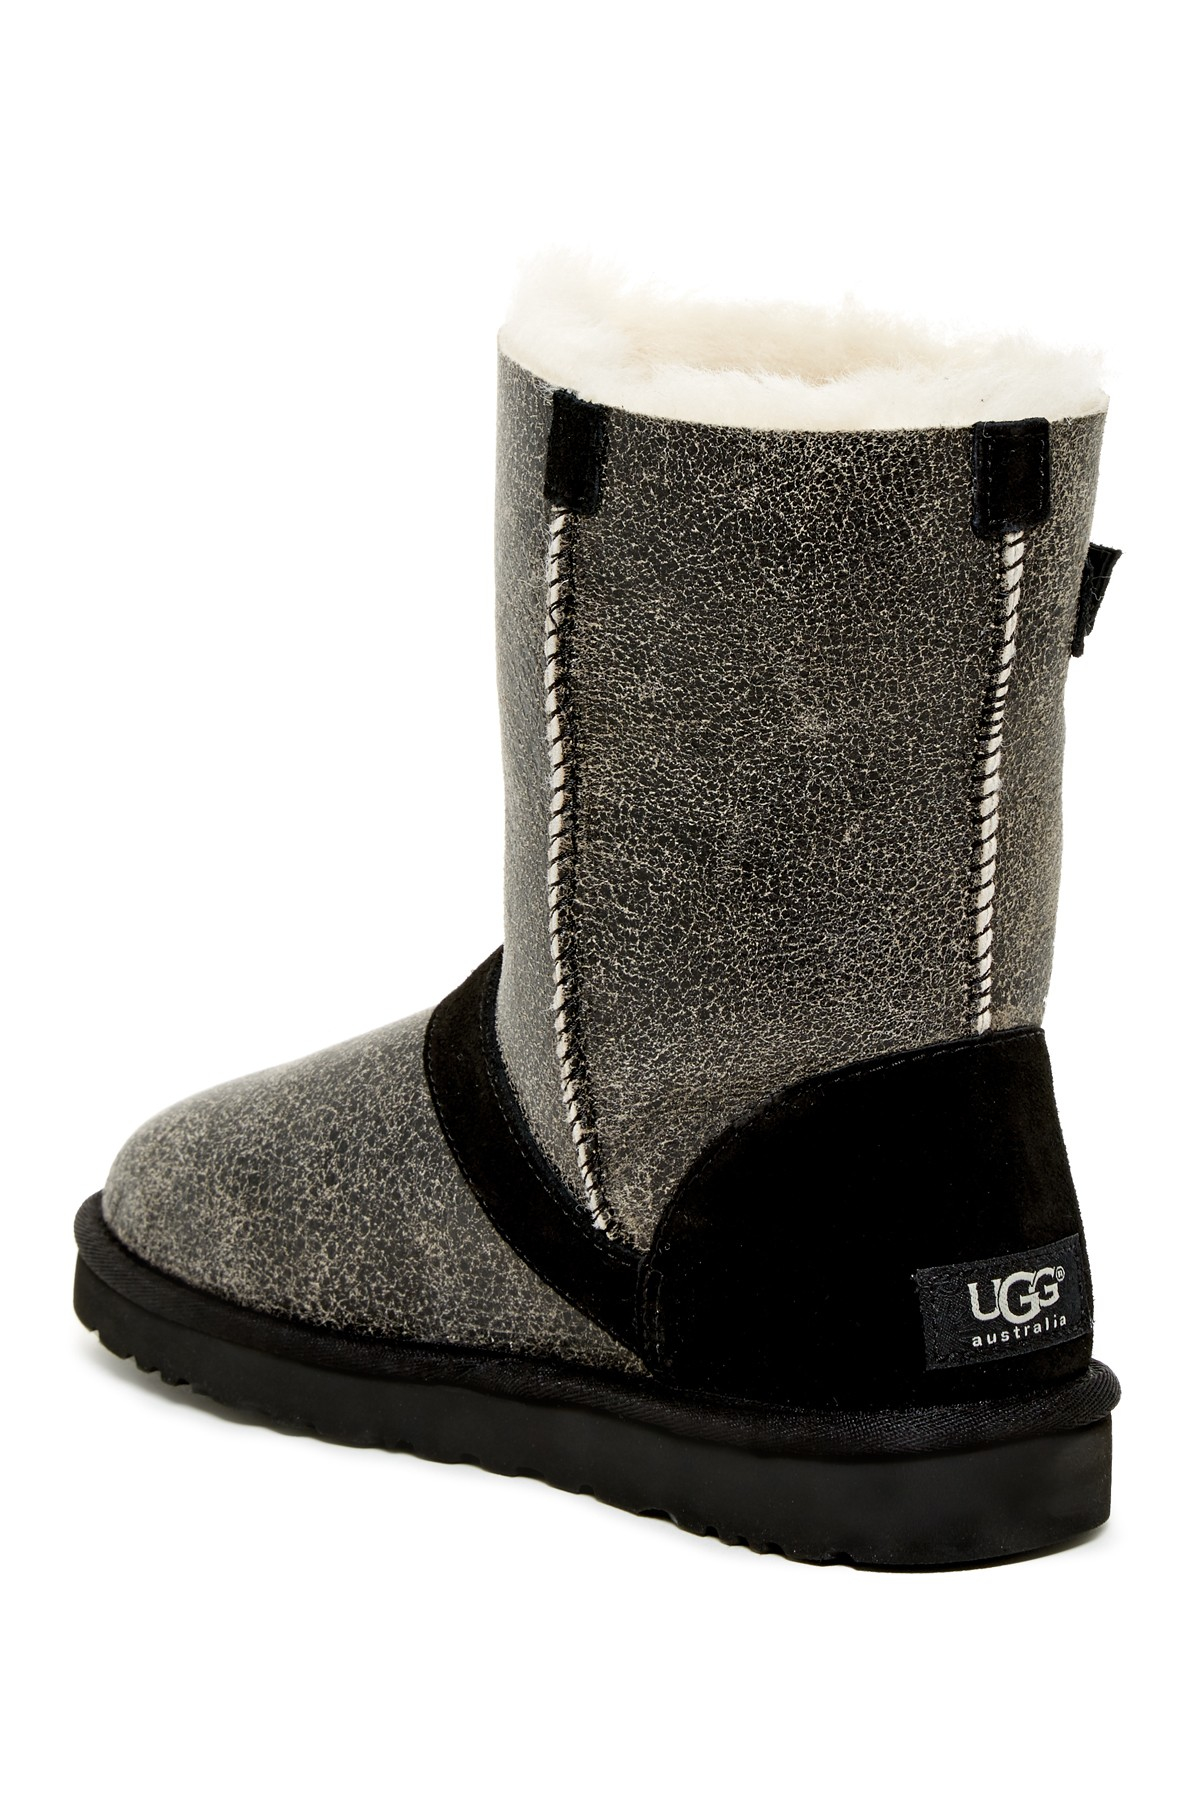 Uggs Tall Black Classic Boots | Division of Global Affairs